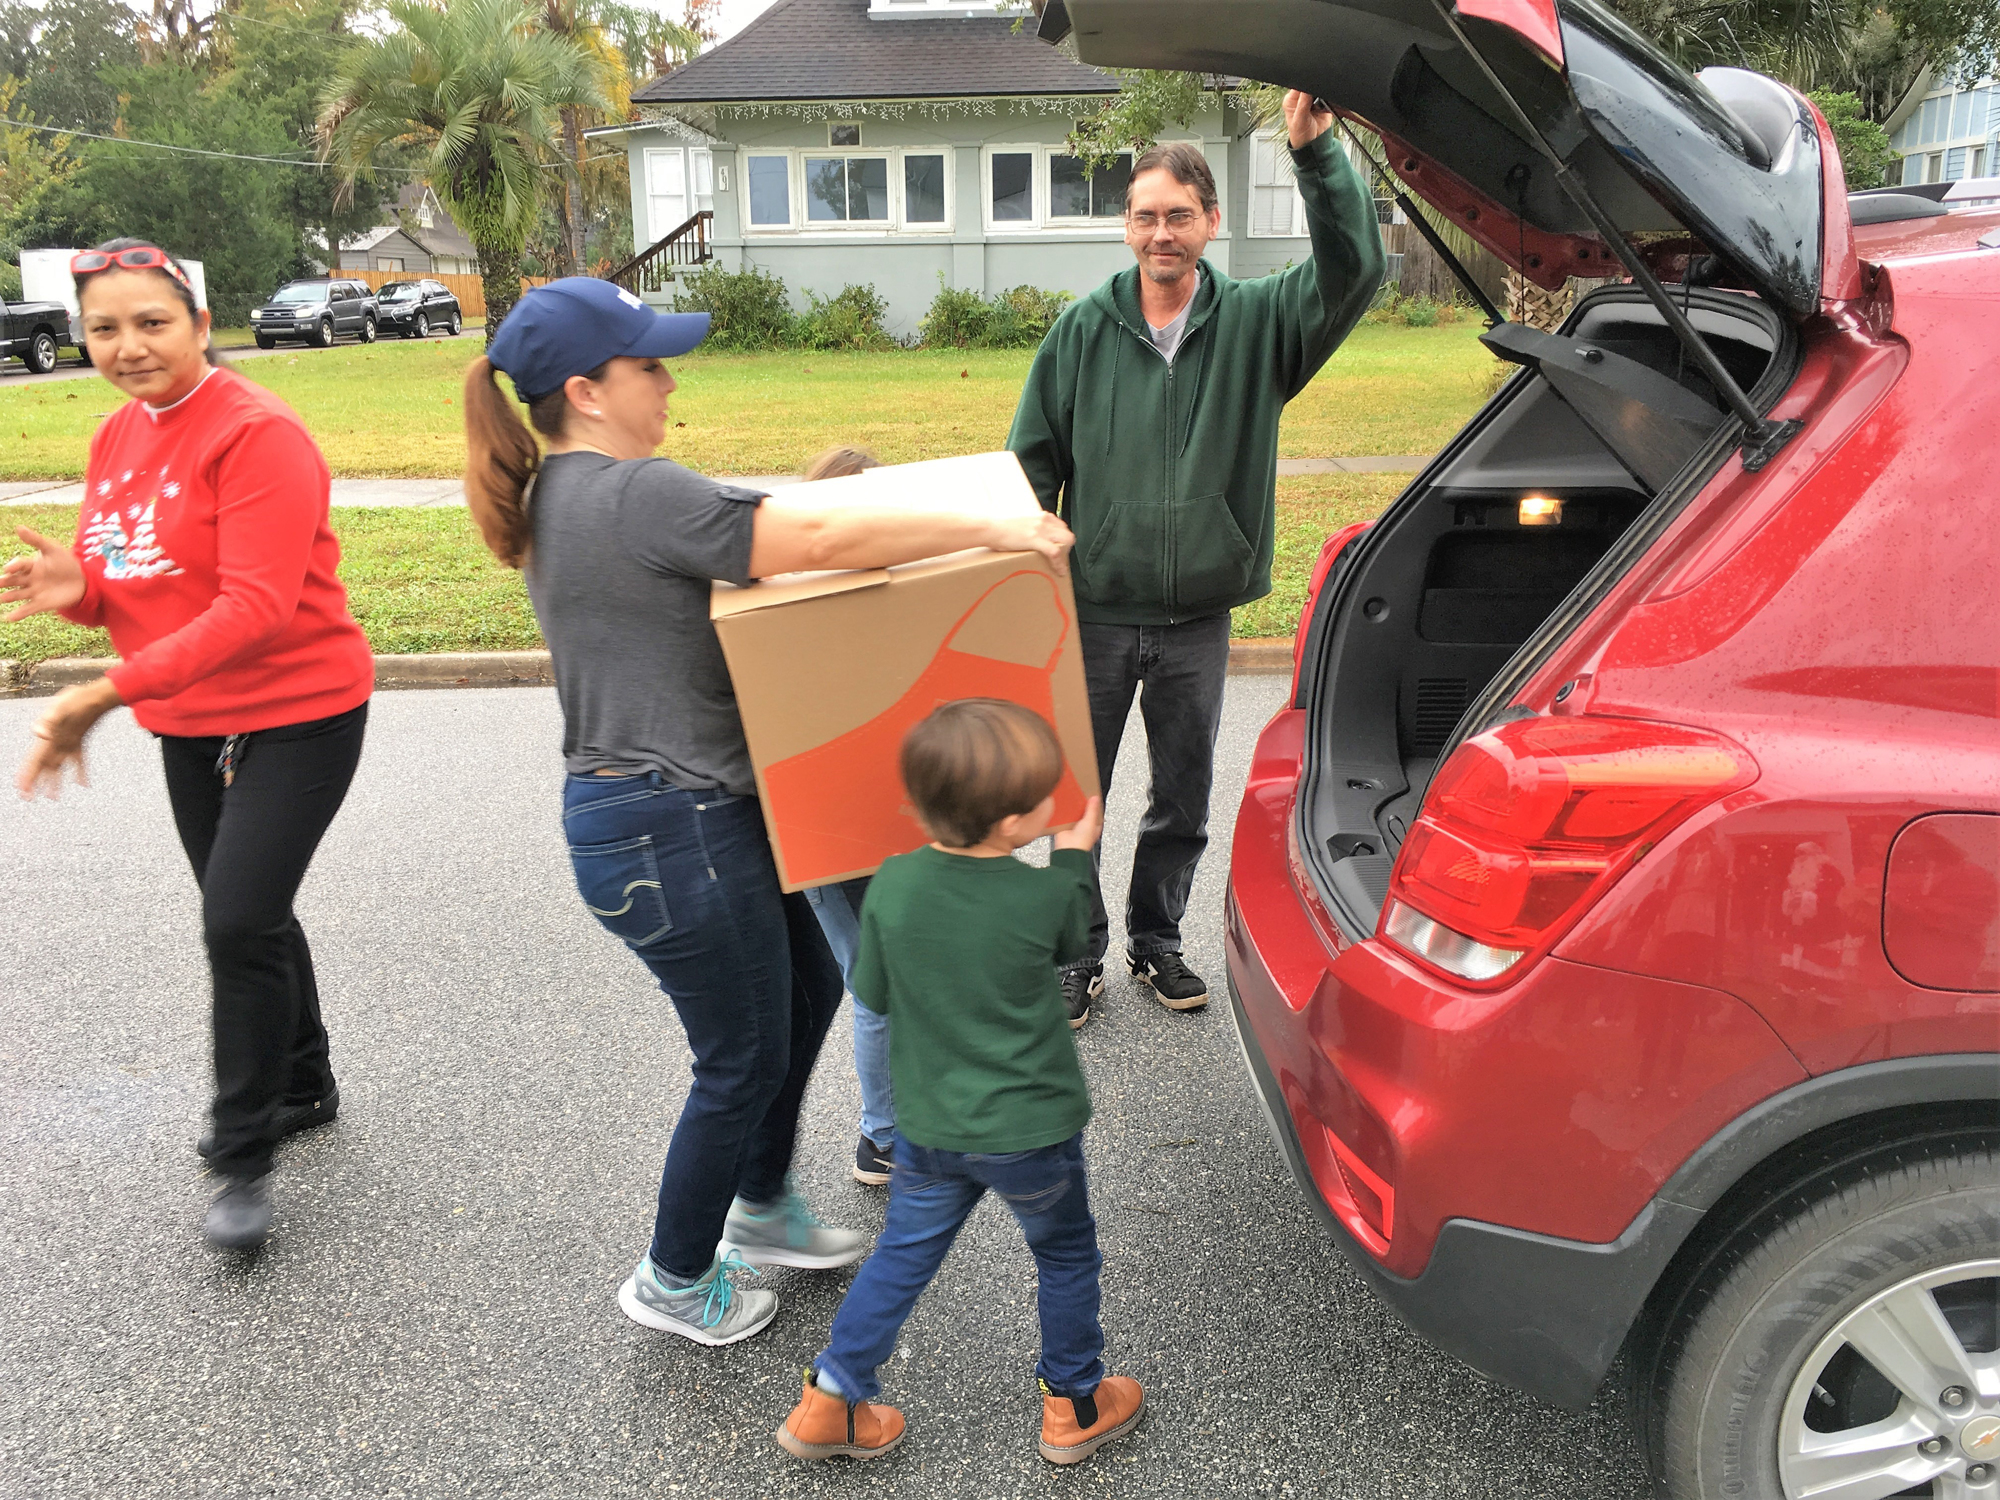 Volunteers with the Clay Builders Council and the Food Pantry of Green Cove Springs load up food boxes Dec. 15 to provide needy families with a traditional Christmas dinner.